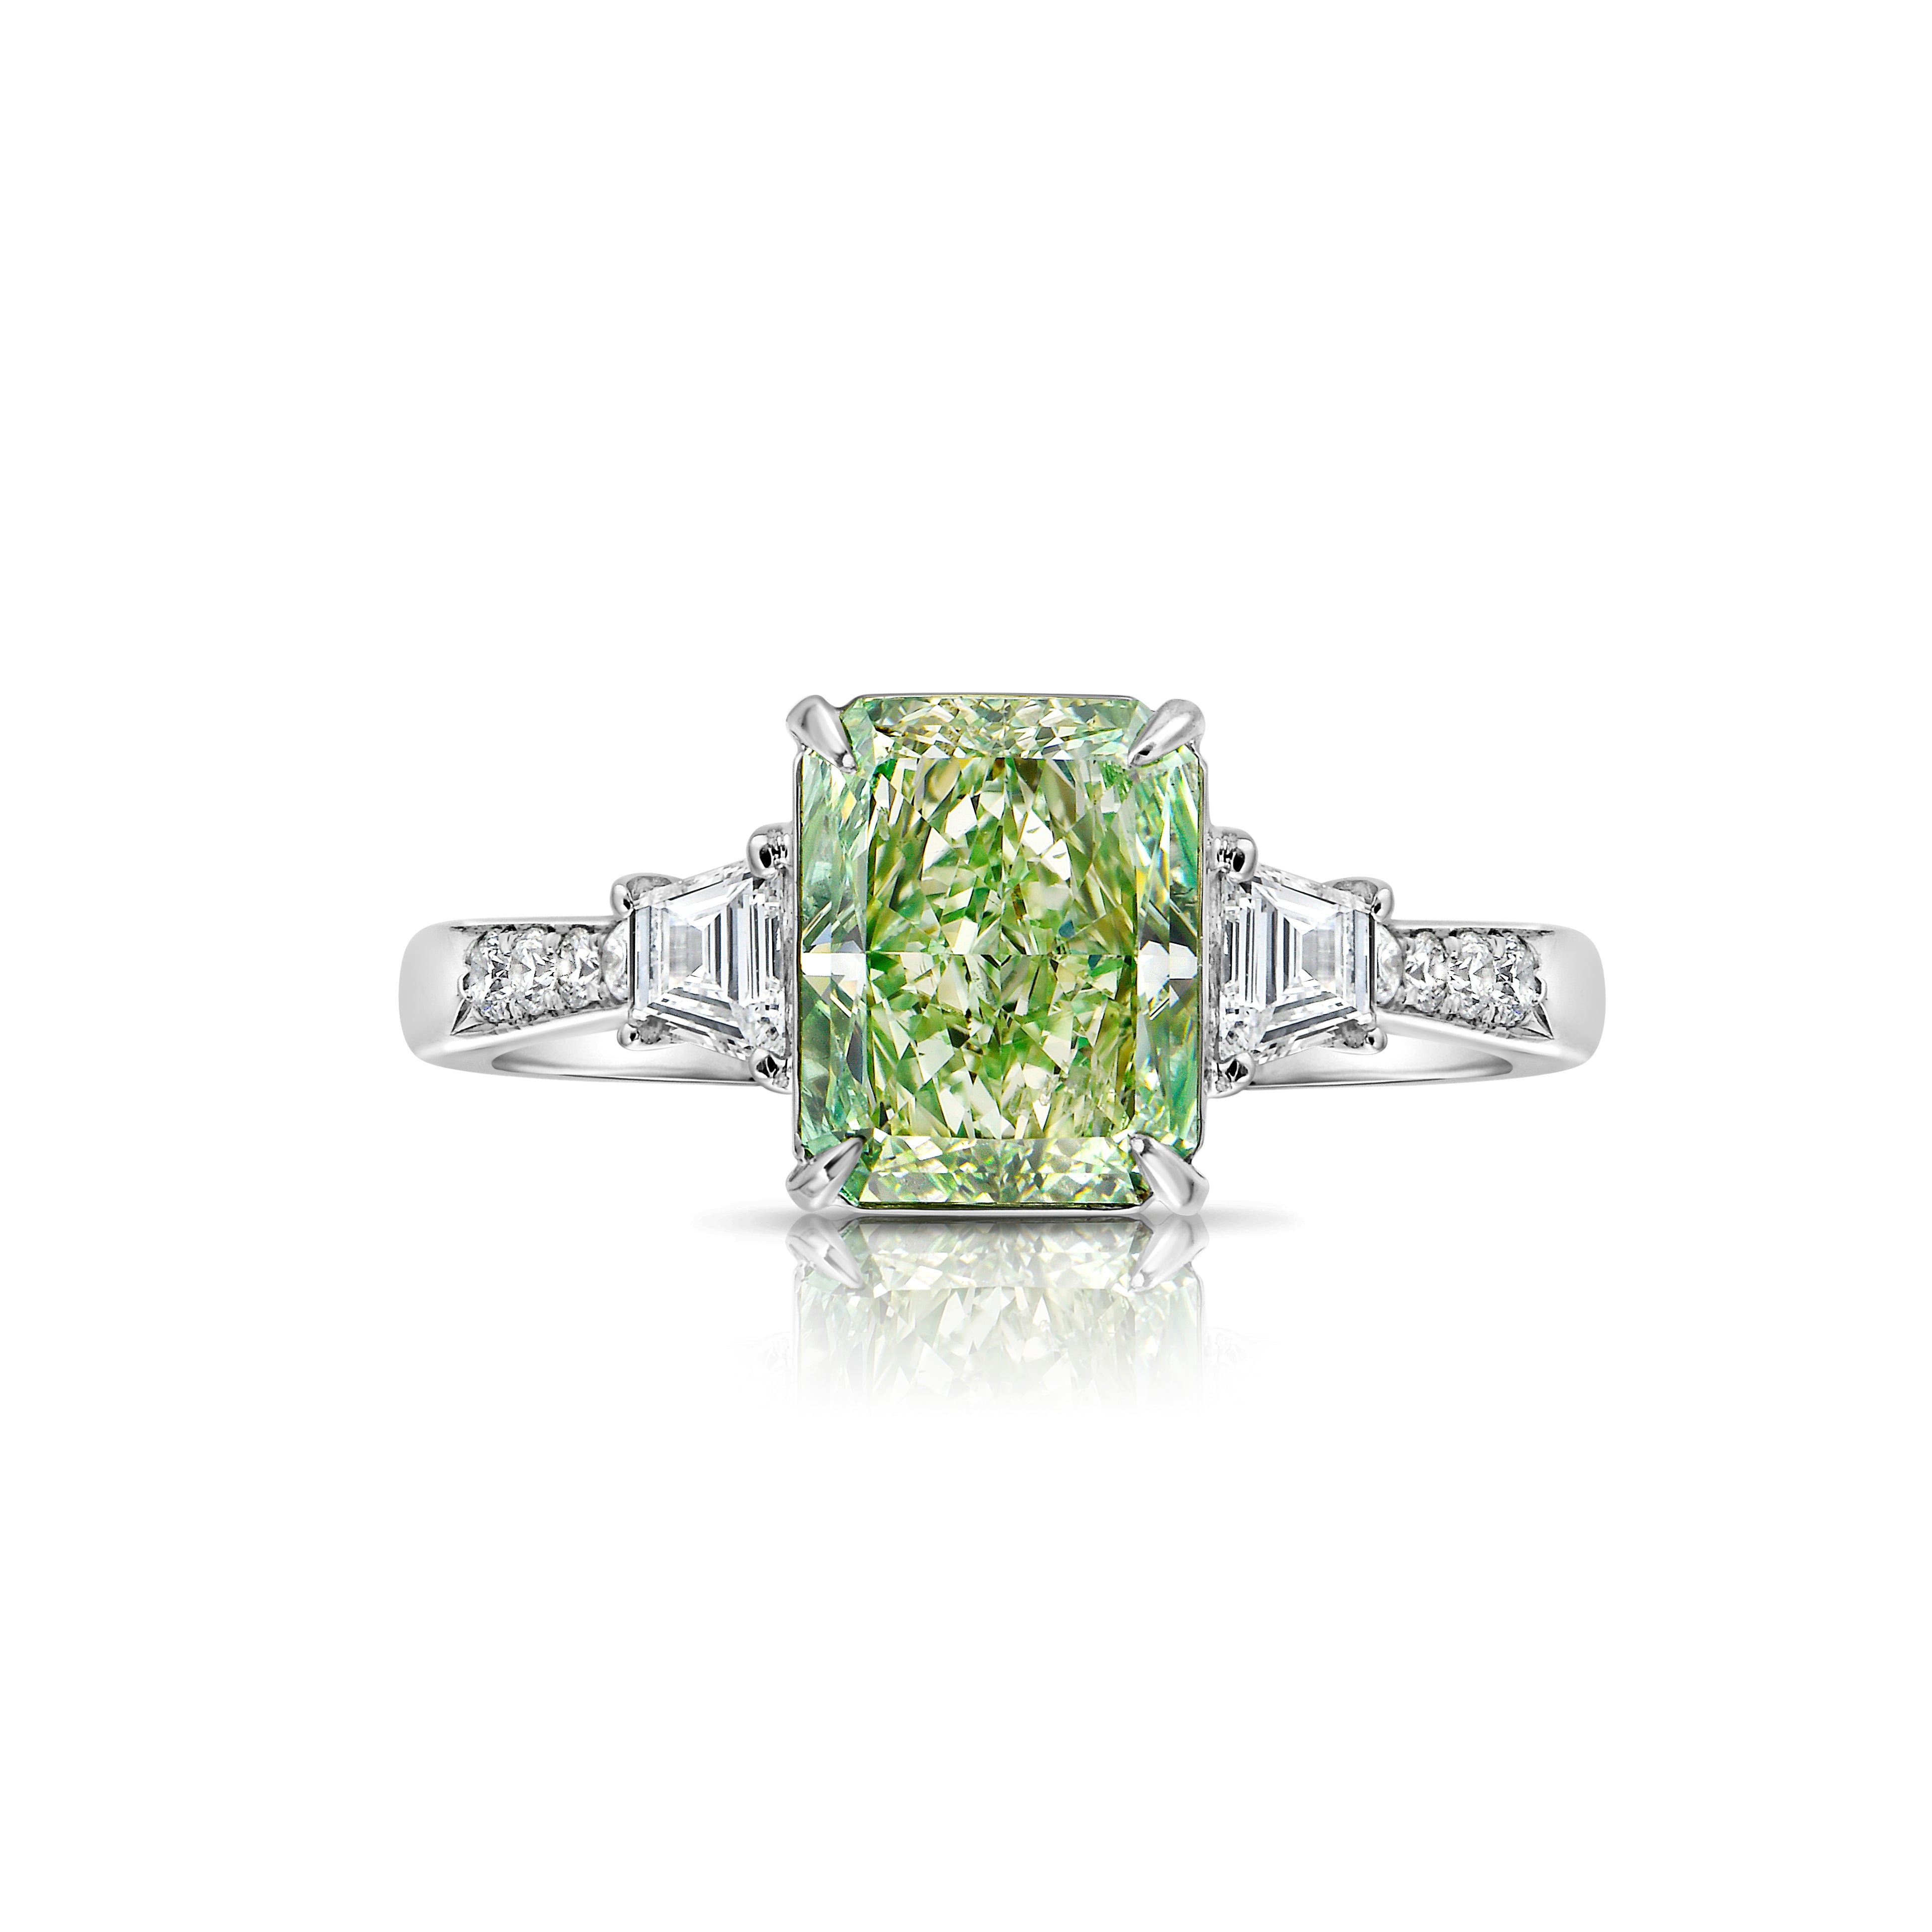 The most beautiful green engagement rings